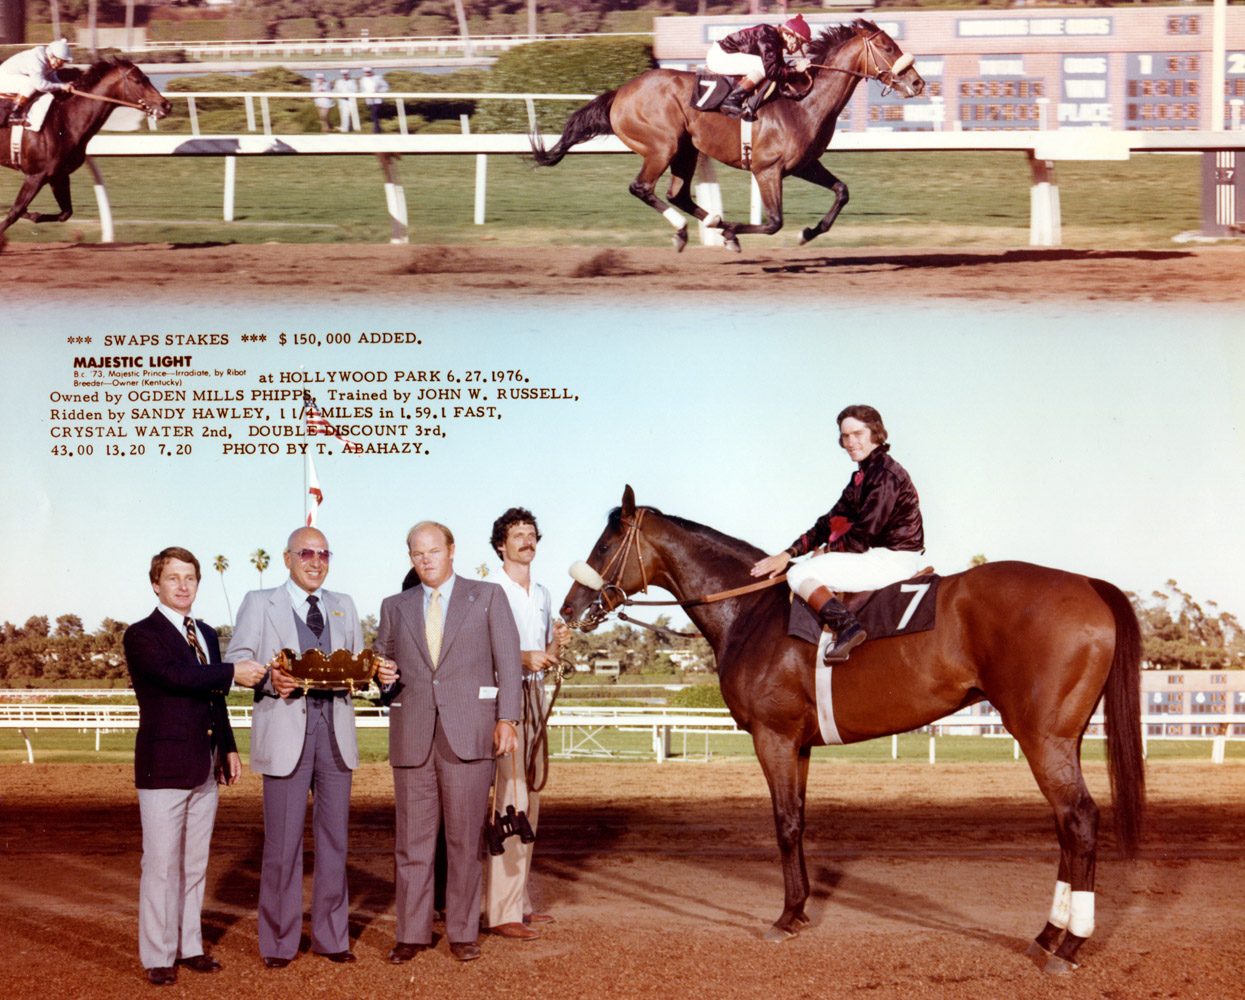 Win composite photograph for the 1976 Swaps Stakes at Hollywood Park, won by Majestic Light (owned by Ogden Mills "Dinny" Phipps) (Hollywood Park Photo/Museum Collection)